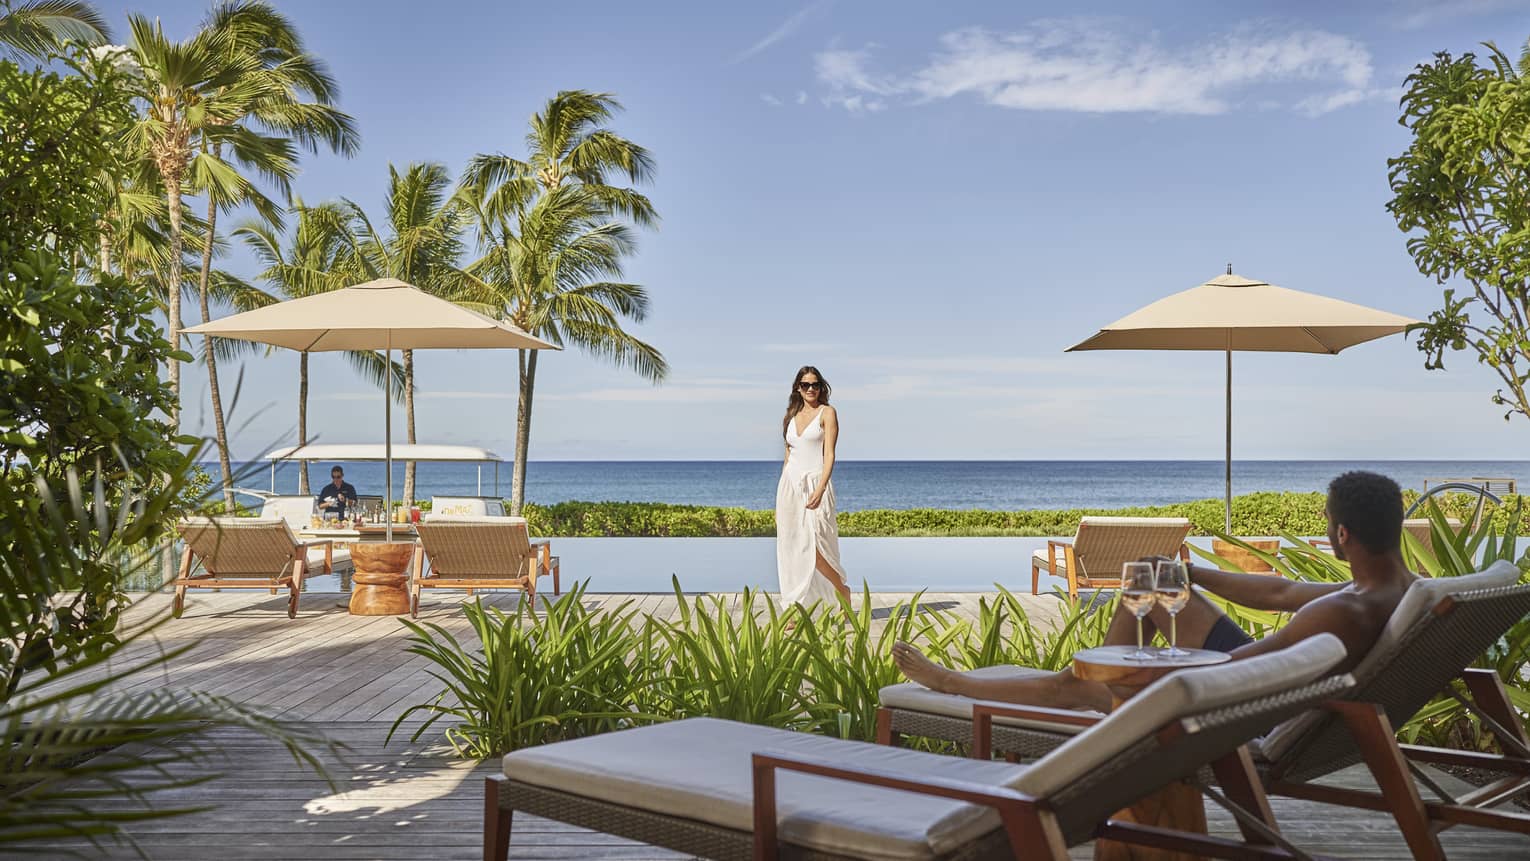 A woman dressed in white walks toward a lounge chair by an outdoor infinity pool